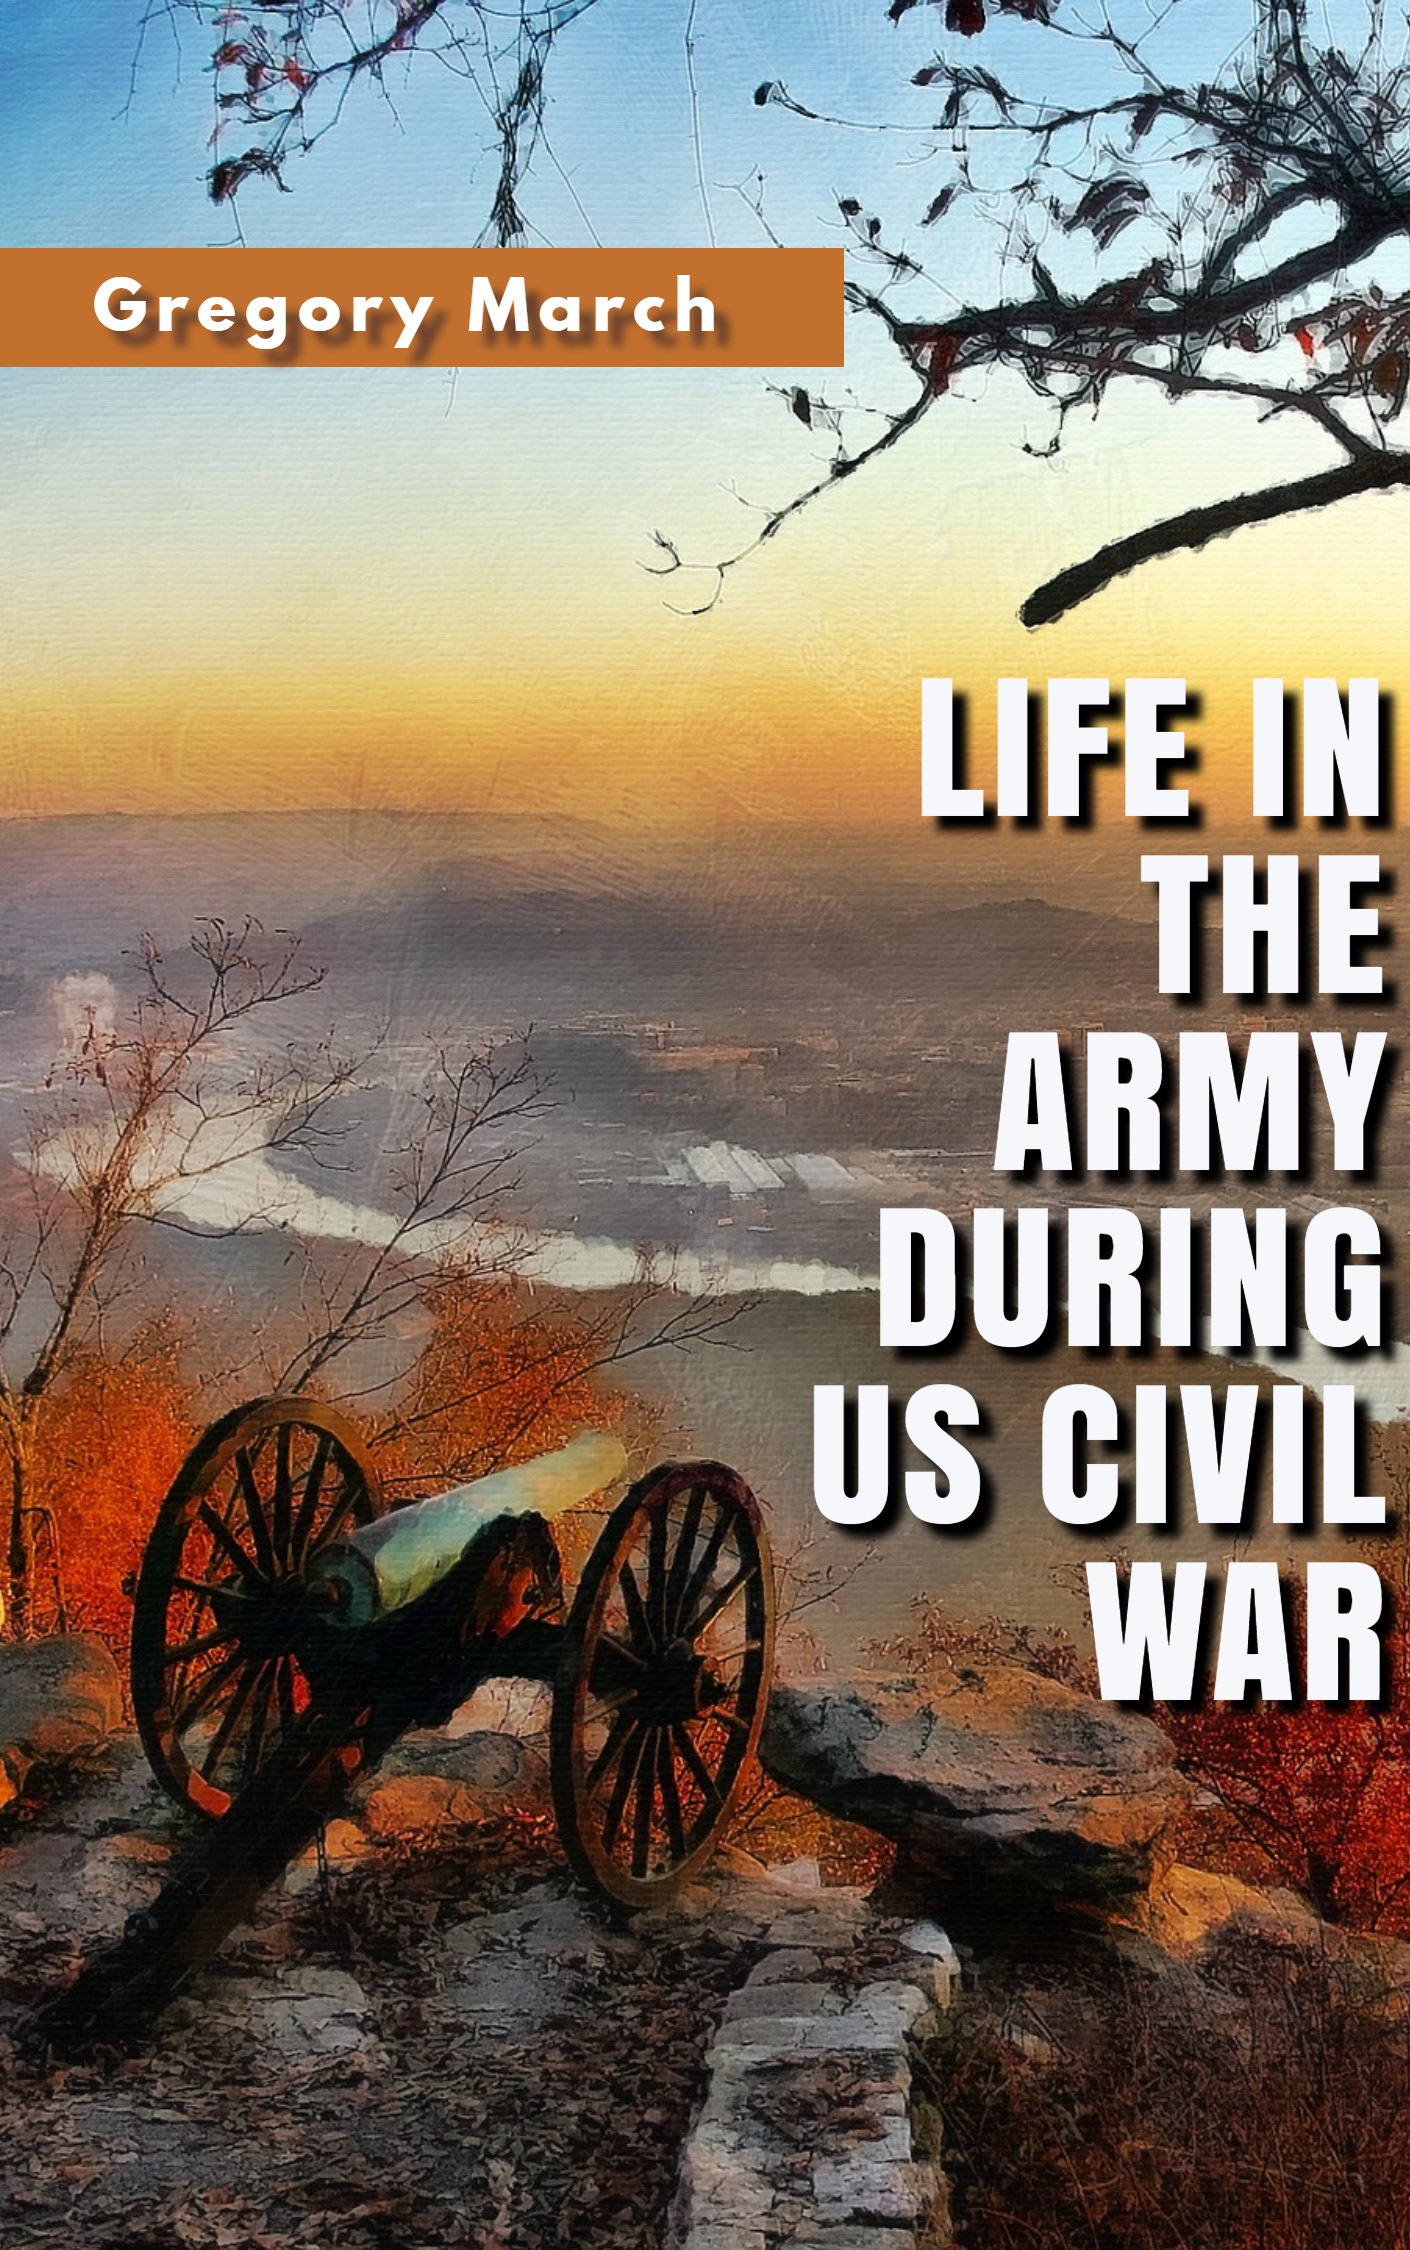 FREE: LIFE IN THE ARMY DURING US CIVIL WAR by Gregory March